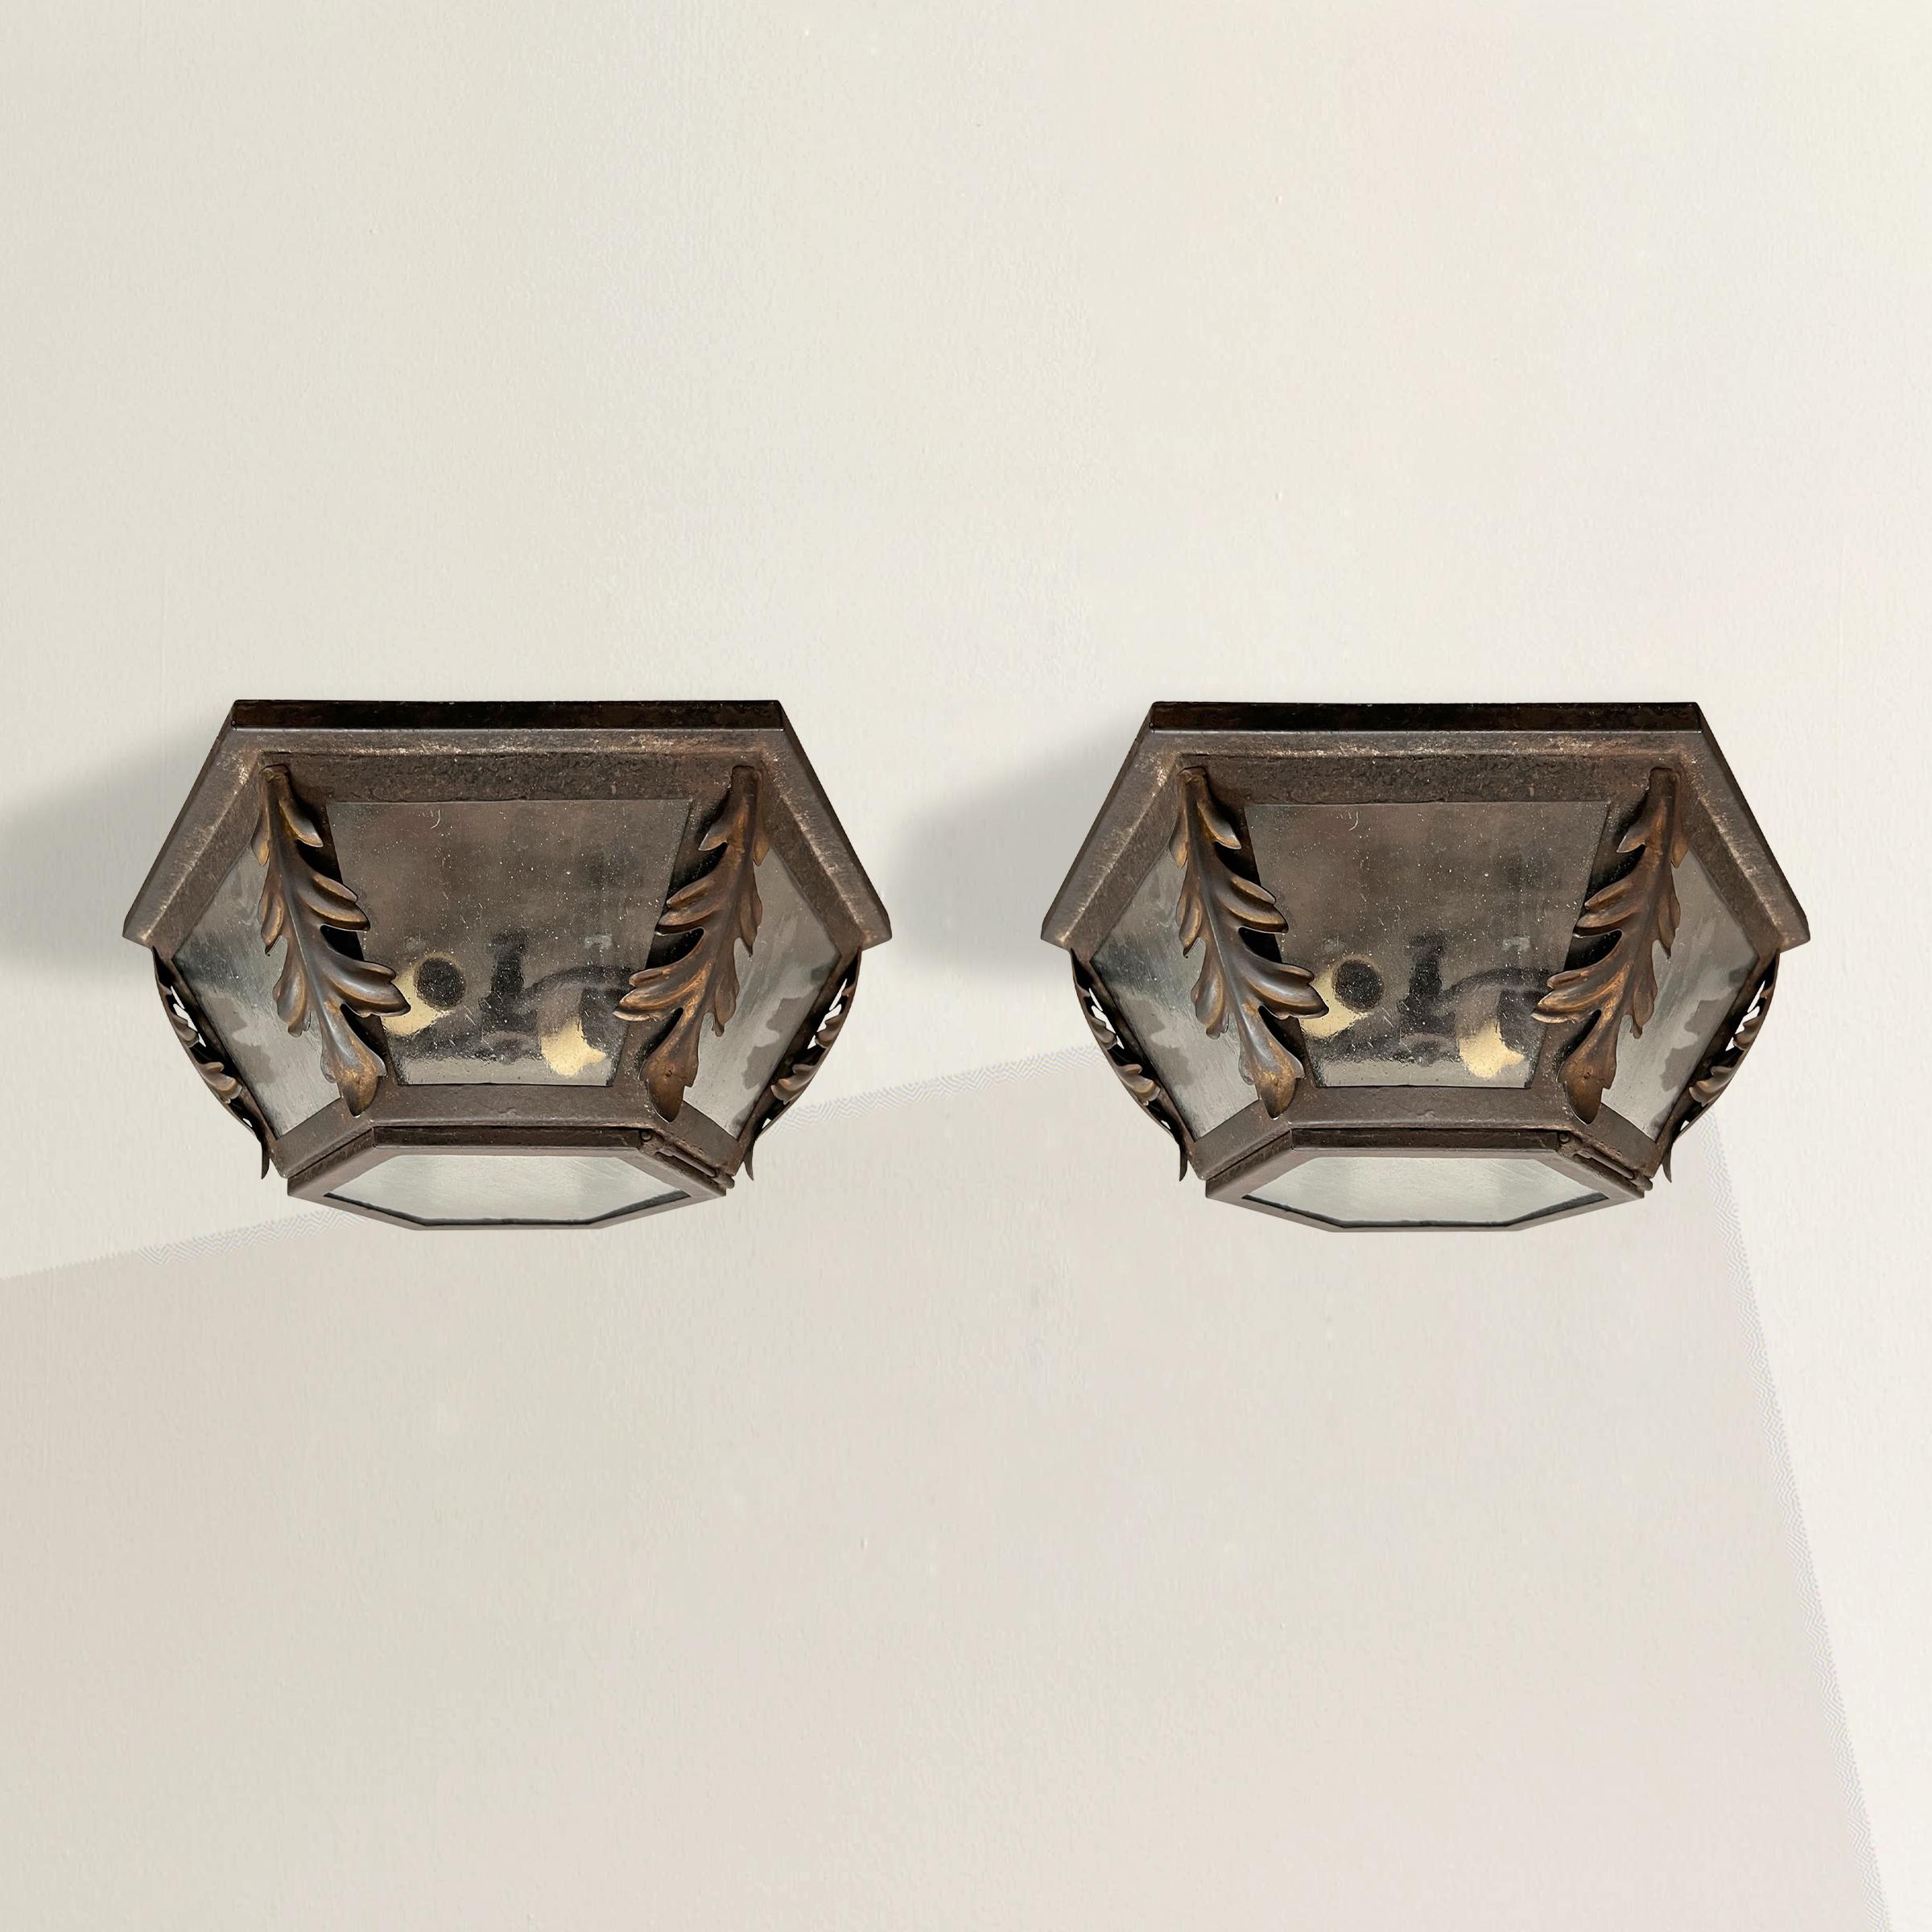 Experience the exquisite craftsmanship of renowned American iron studio, Paul Ferrante, with this extraordinary pair of hand-wrought iron hexagonal flush mount light fixtures. The hexagonal shape adds a touch of contemporary flair while the applied